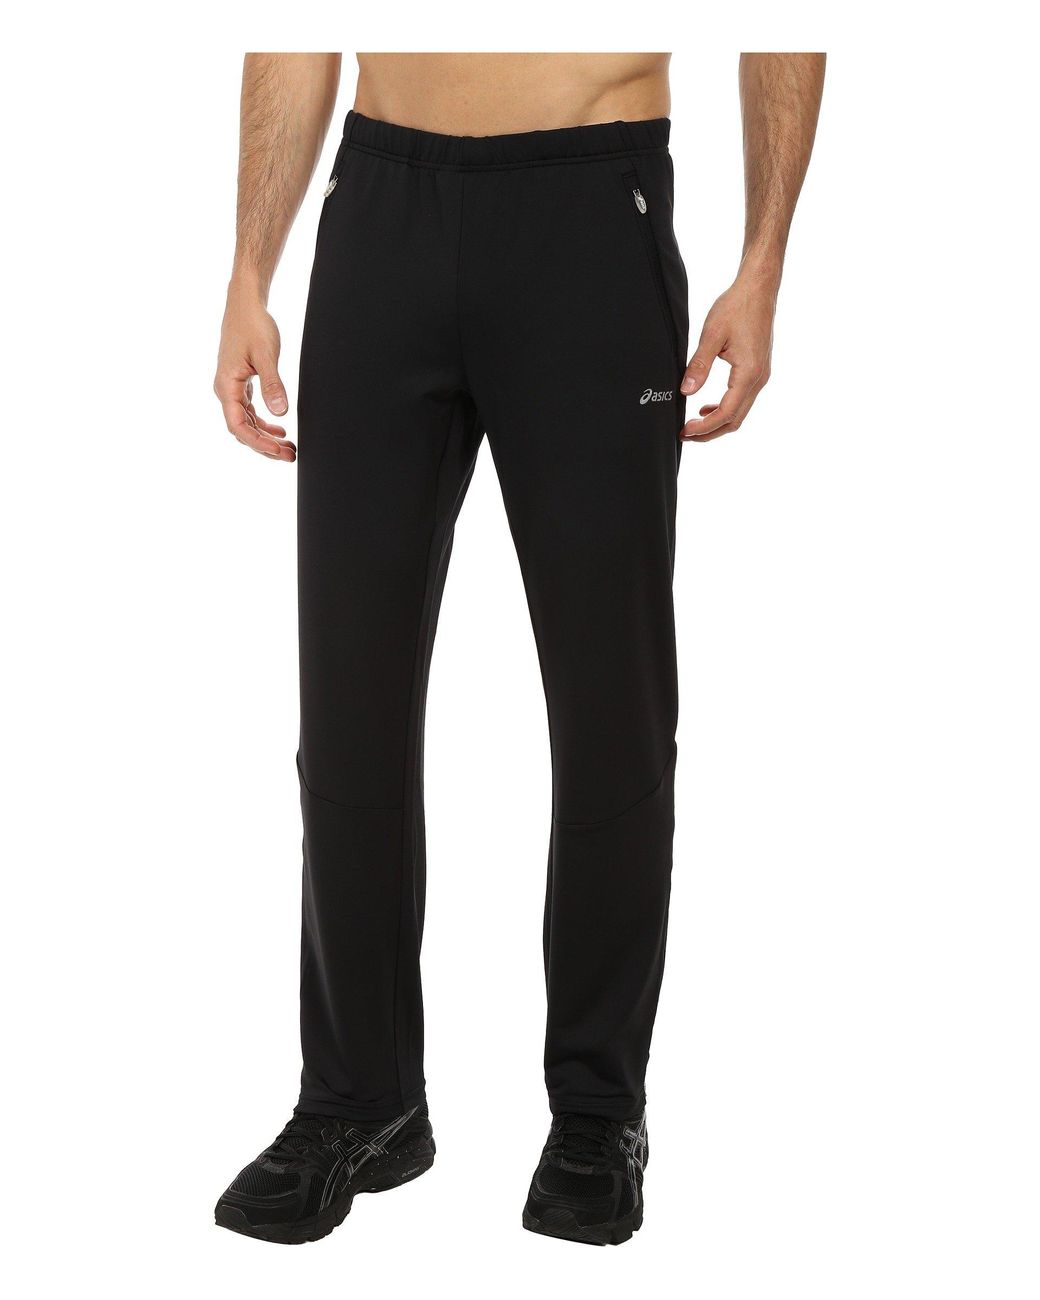 Asics Synthetic Essentials Pant in Black for Men - Lyst